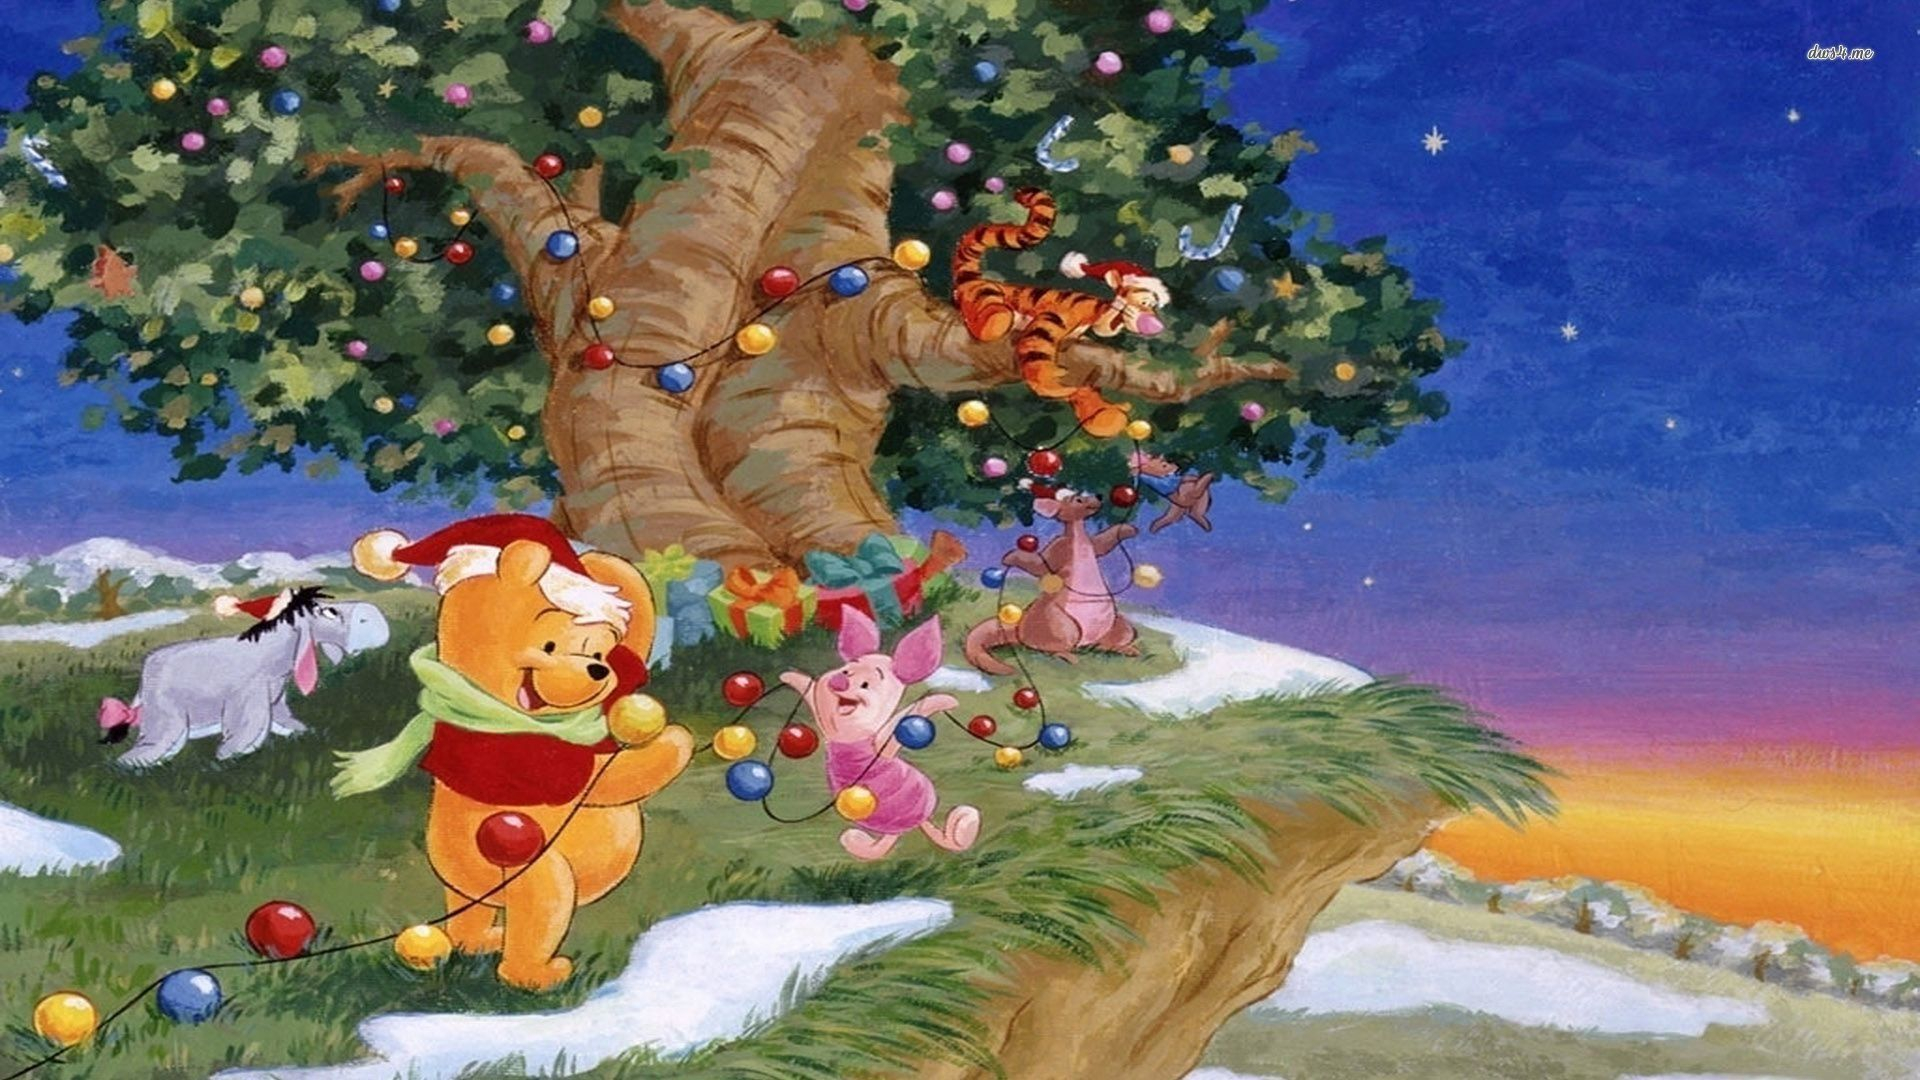 1920x1080 Winnie the Pooh Christmas Wallpapers Top Free Winnie the Pooh Christmas Backgrounds